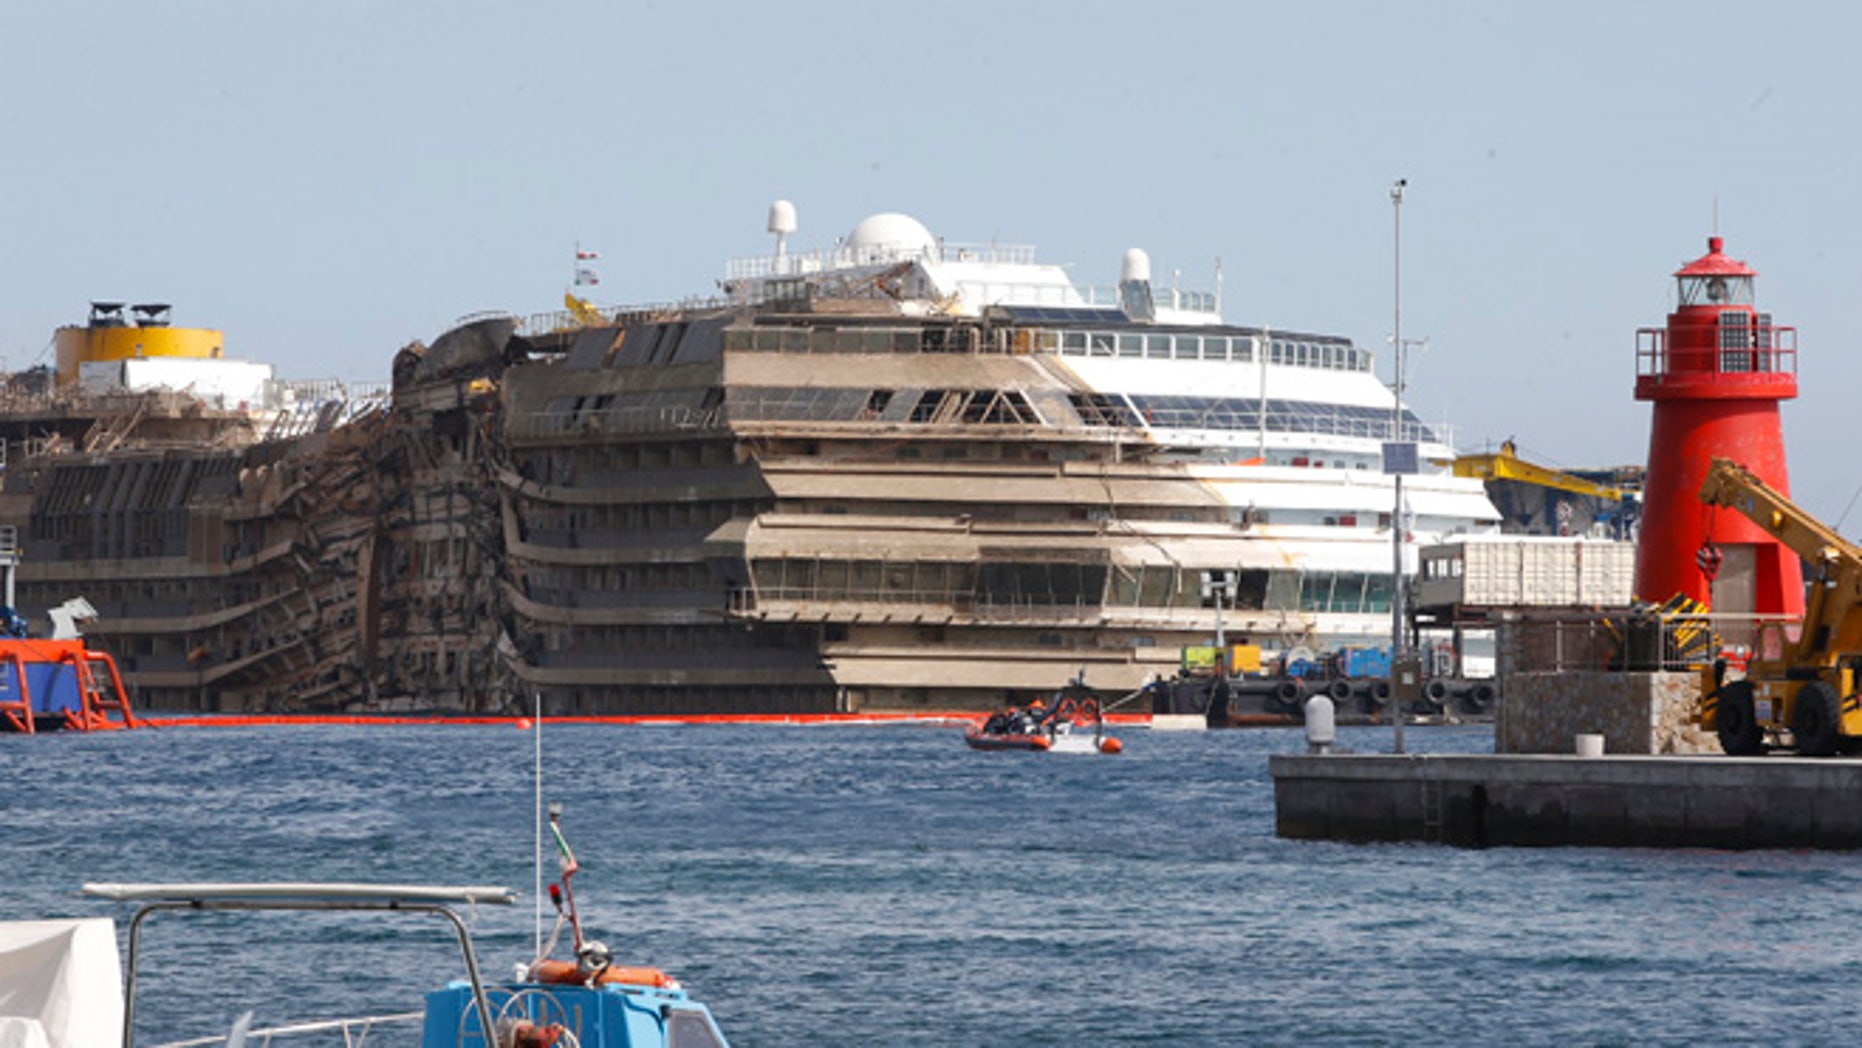 Four men suspected of trying to steal items from Costa Concordia wreck